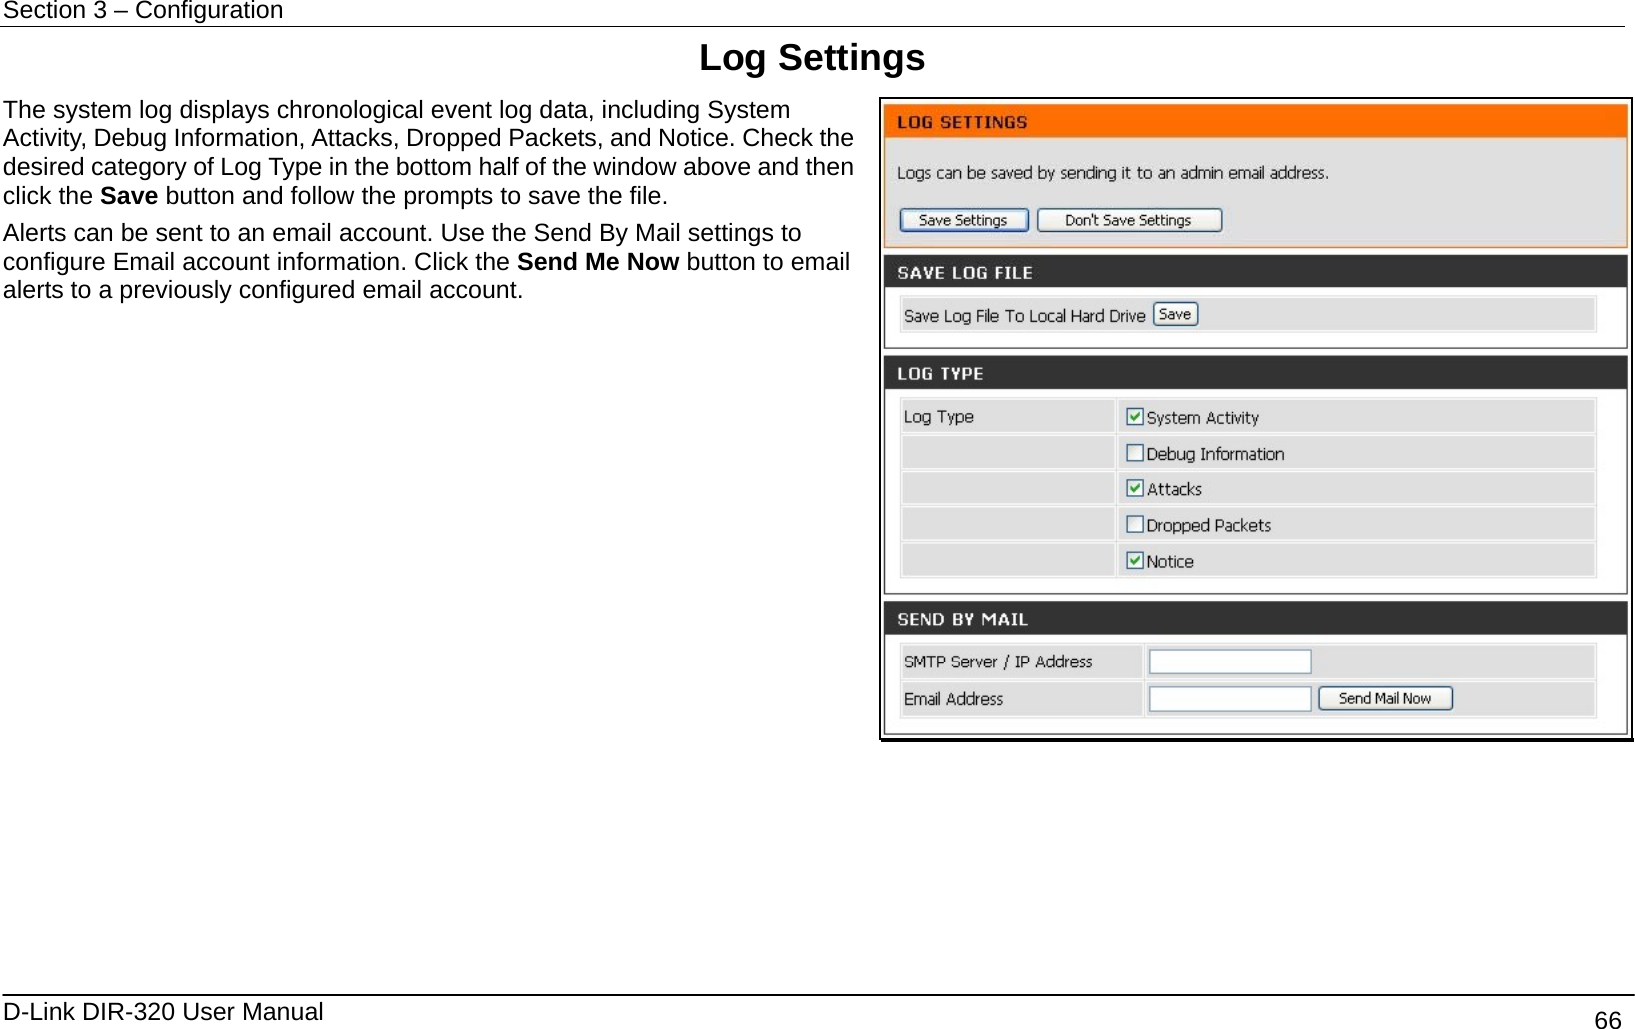 Section 3 – Configuration   D-Link DIR-320 User Manual                                       66 Log Settings The system log displays chronological event log data, including System Activity, Debug Information, Attacks, Dropped Packets, and Notice. Check the desired category of Log Type in the bottom half of the window above and then click the Save button and follow the prompts to save the file. Alerts can be sent to an email account. Use the Send By Mail settings to configure Email account information. Click the Send Me Now button to email alerts to a previously configured email account.      